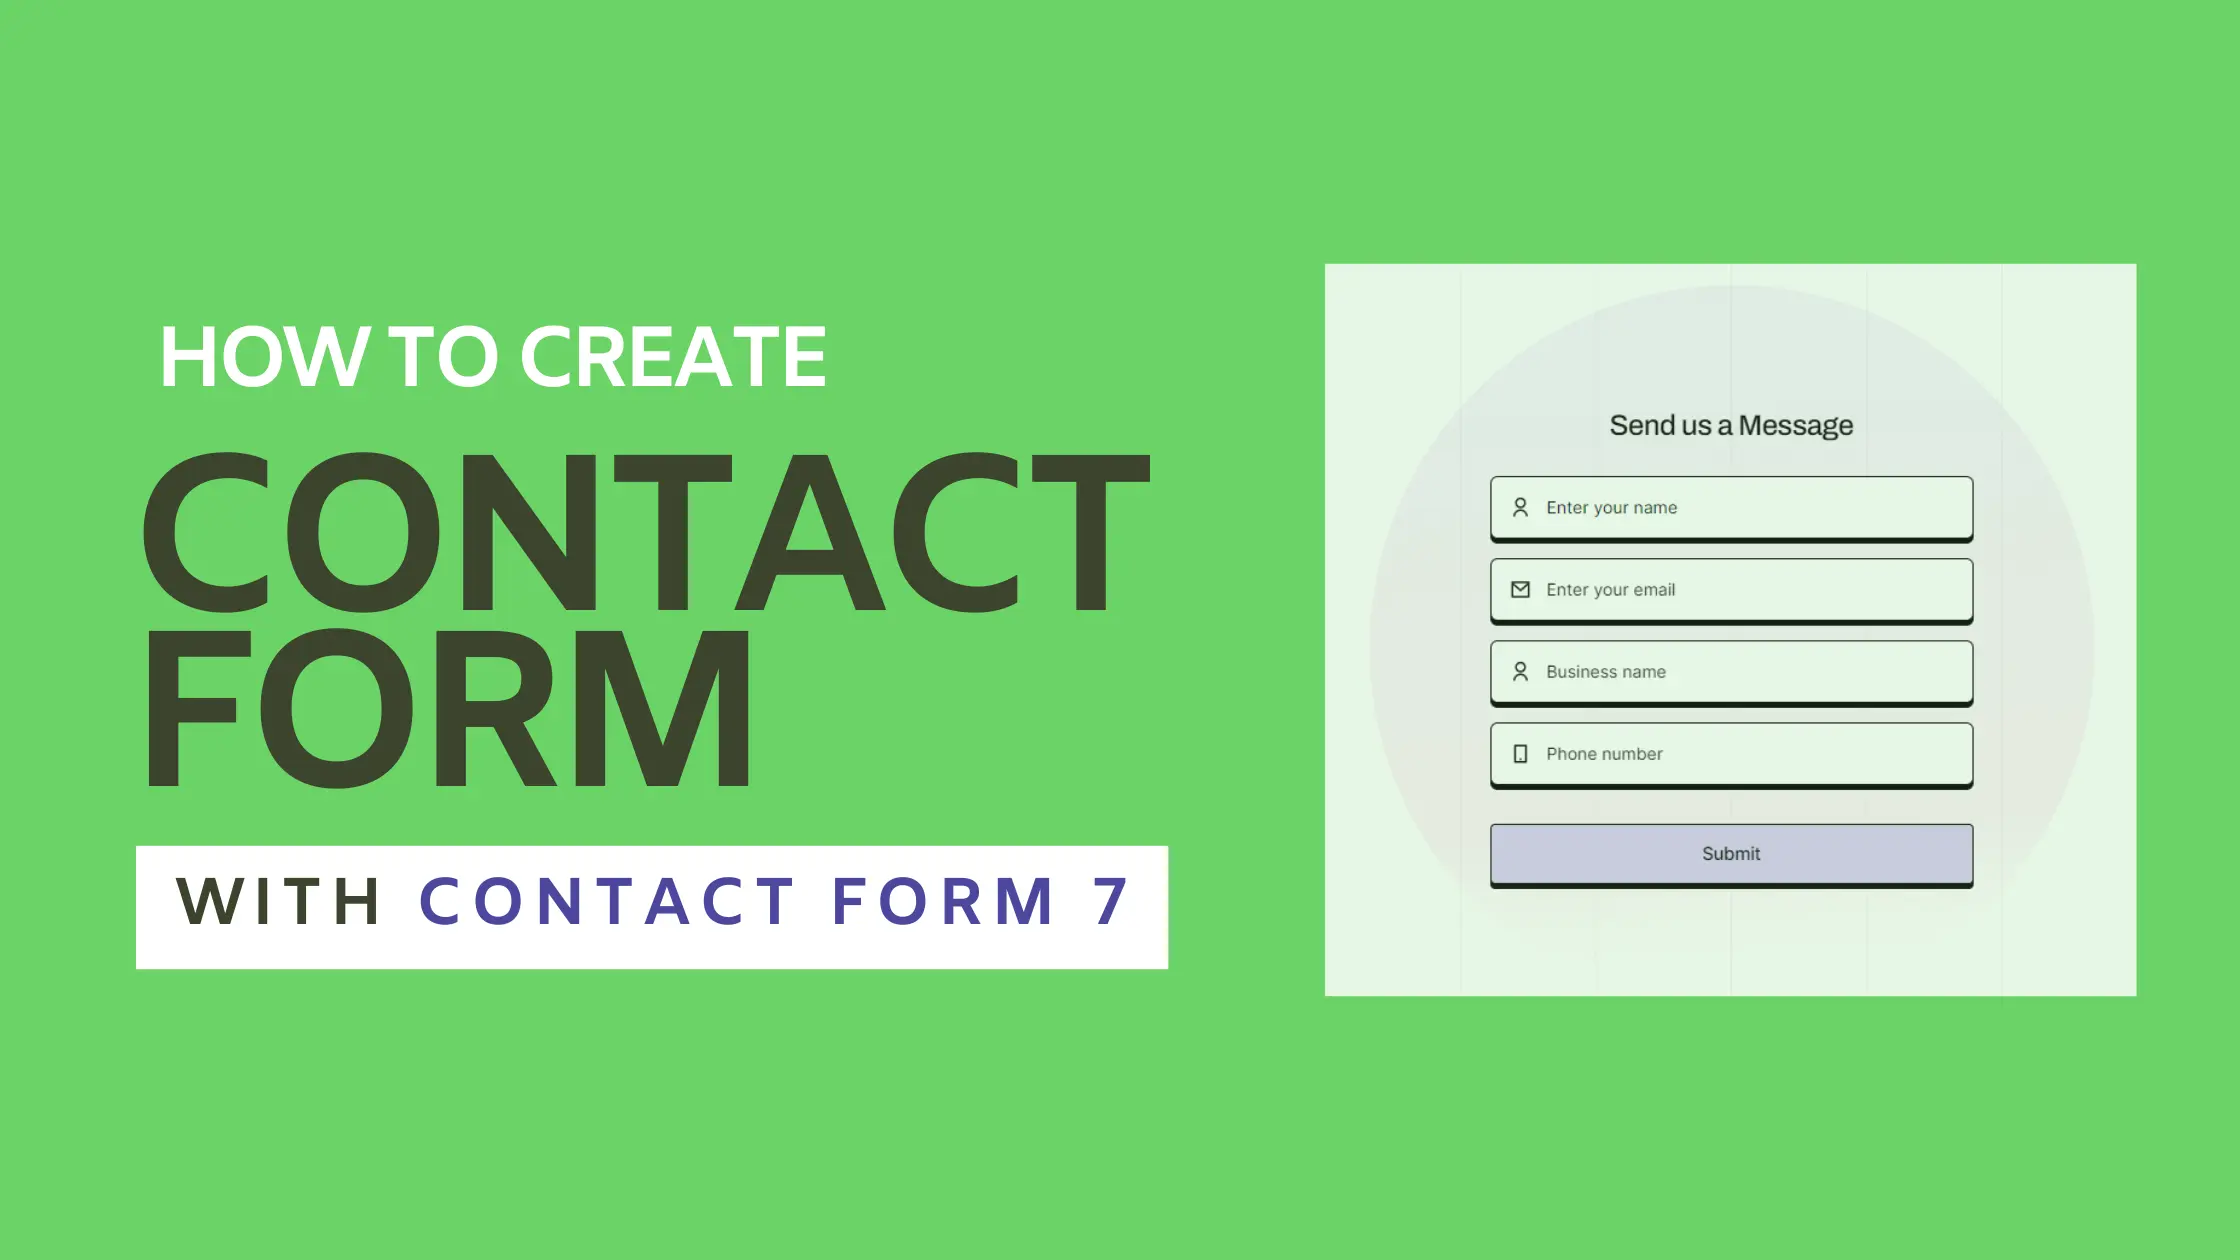 How To Create Contact Form In WordPress Via Contact Form 7